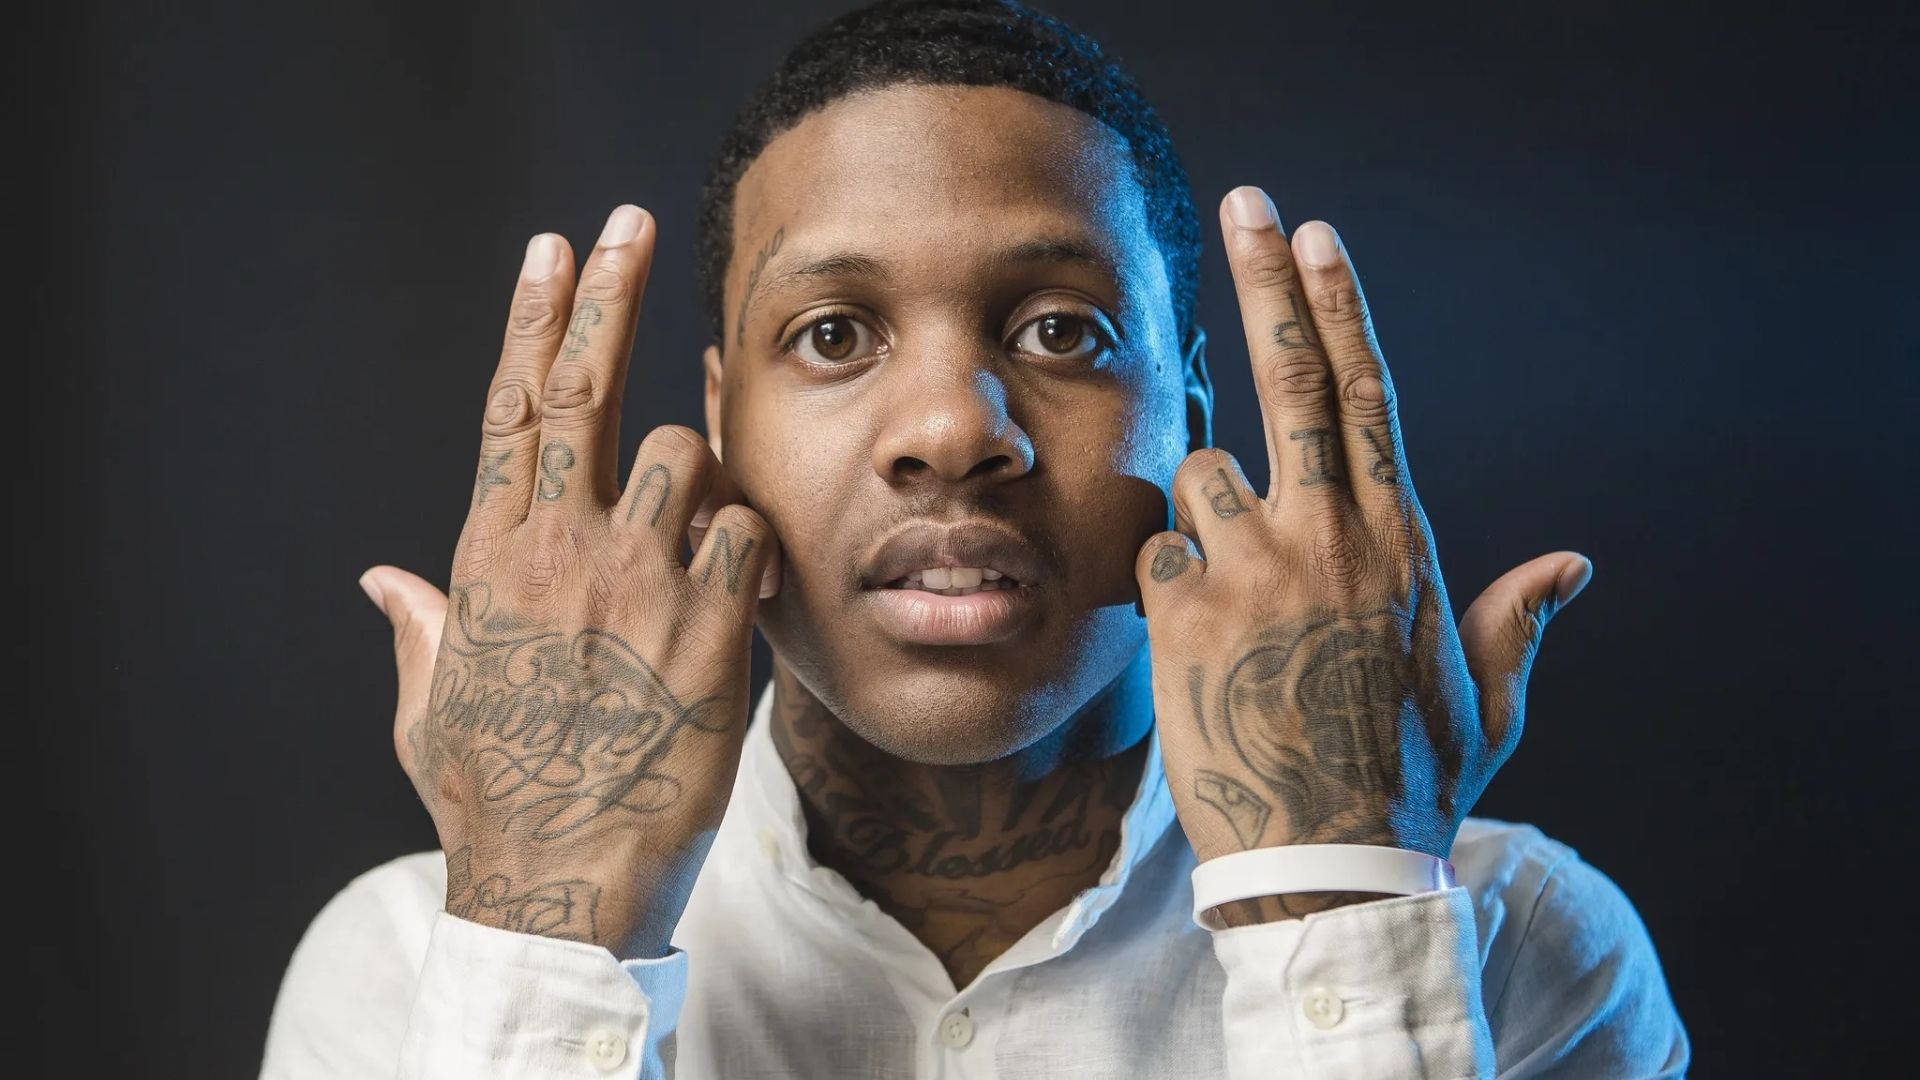 What Illness Is Lil Durk Suffering From? Rapper Cancels Tour Due To Health Issues